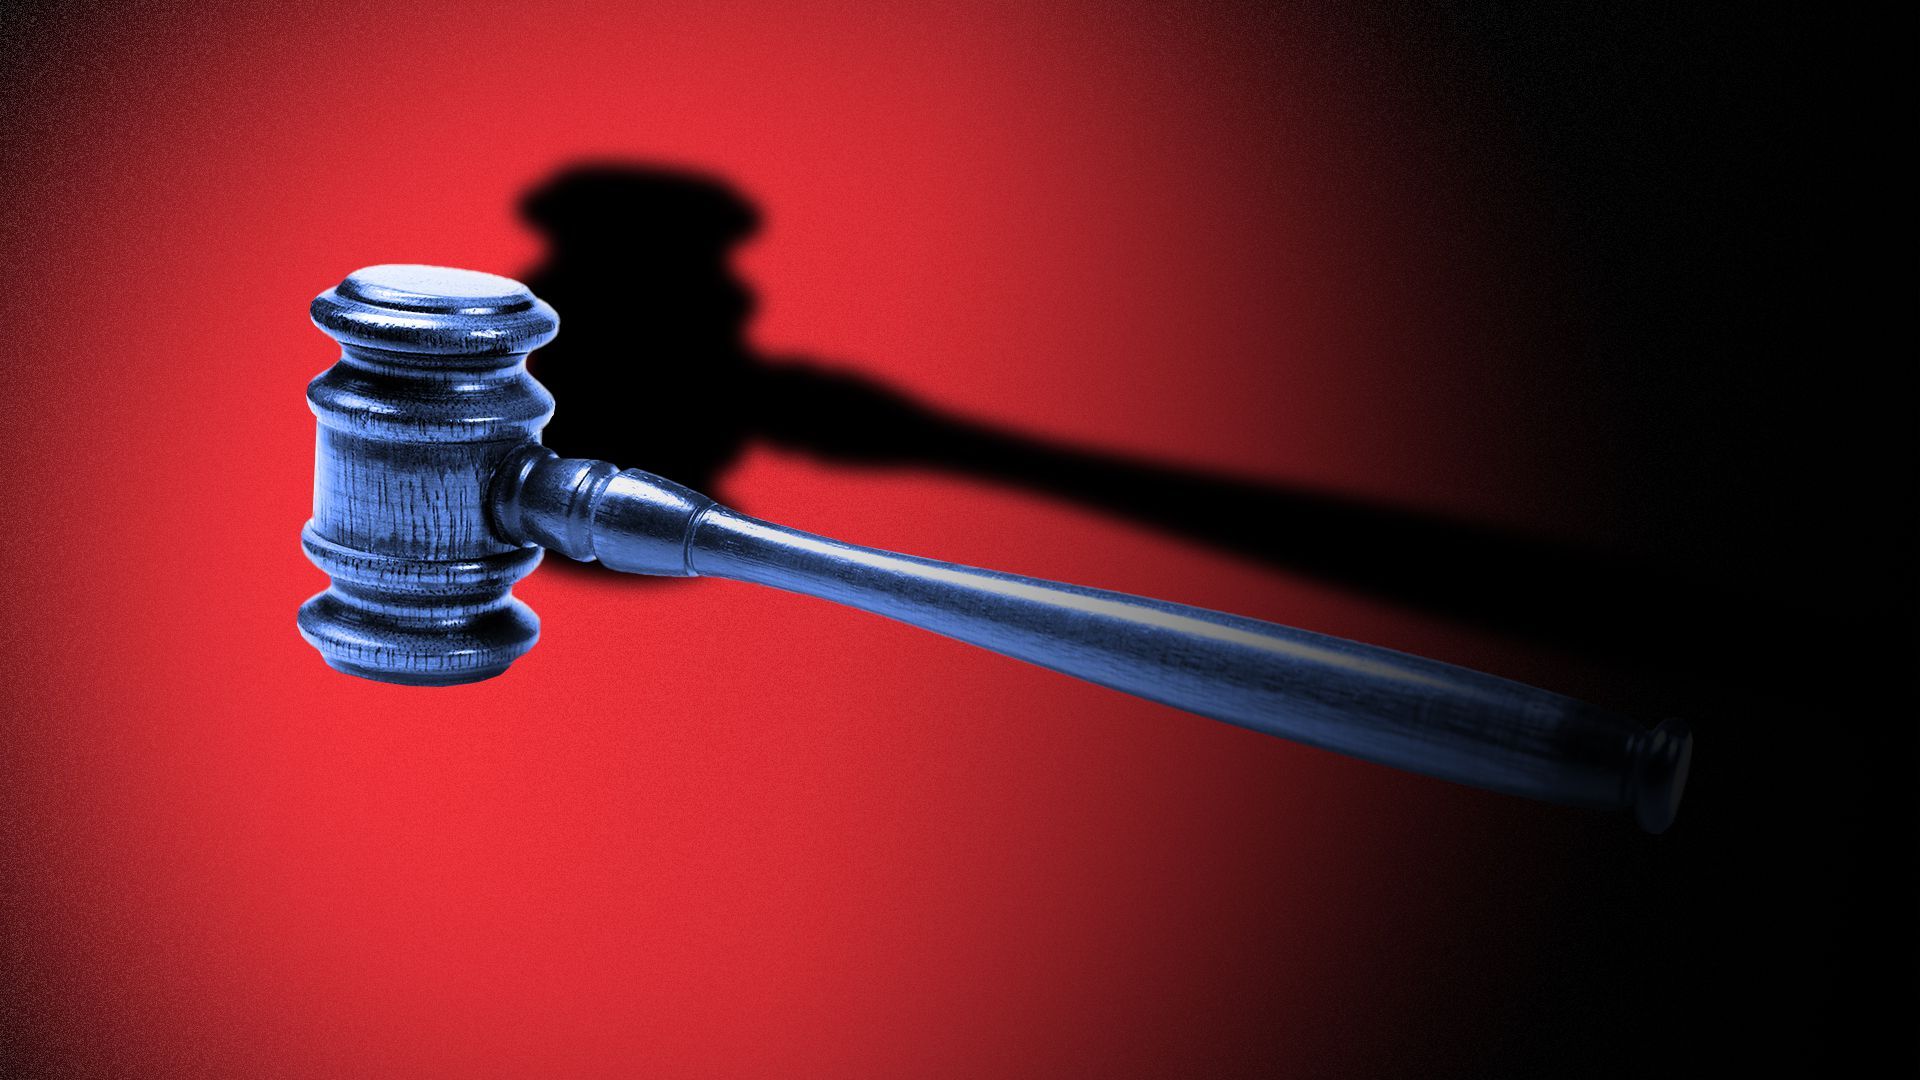 Illustration of a gavel emerging from a shadow